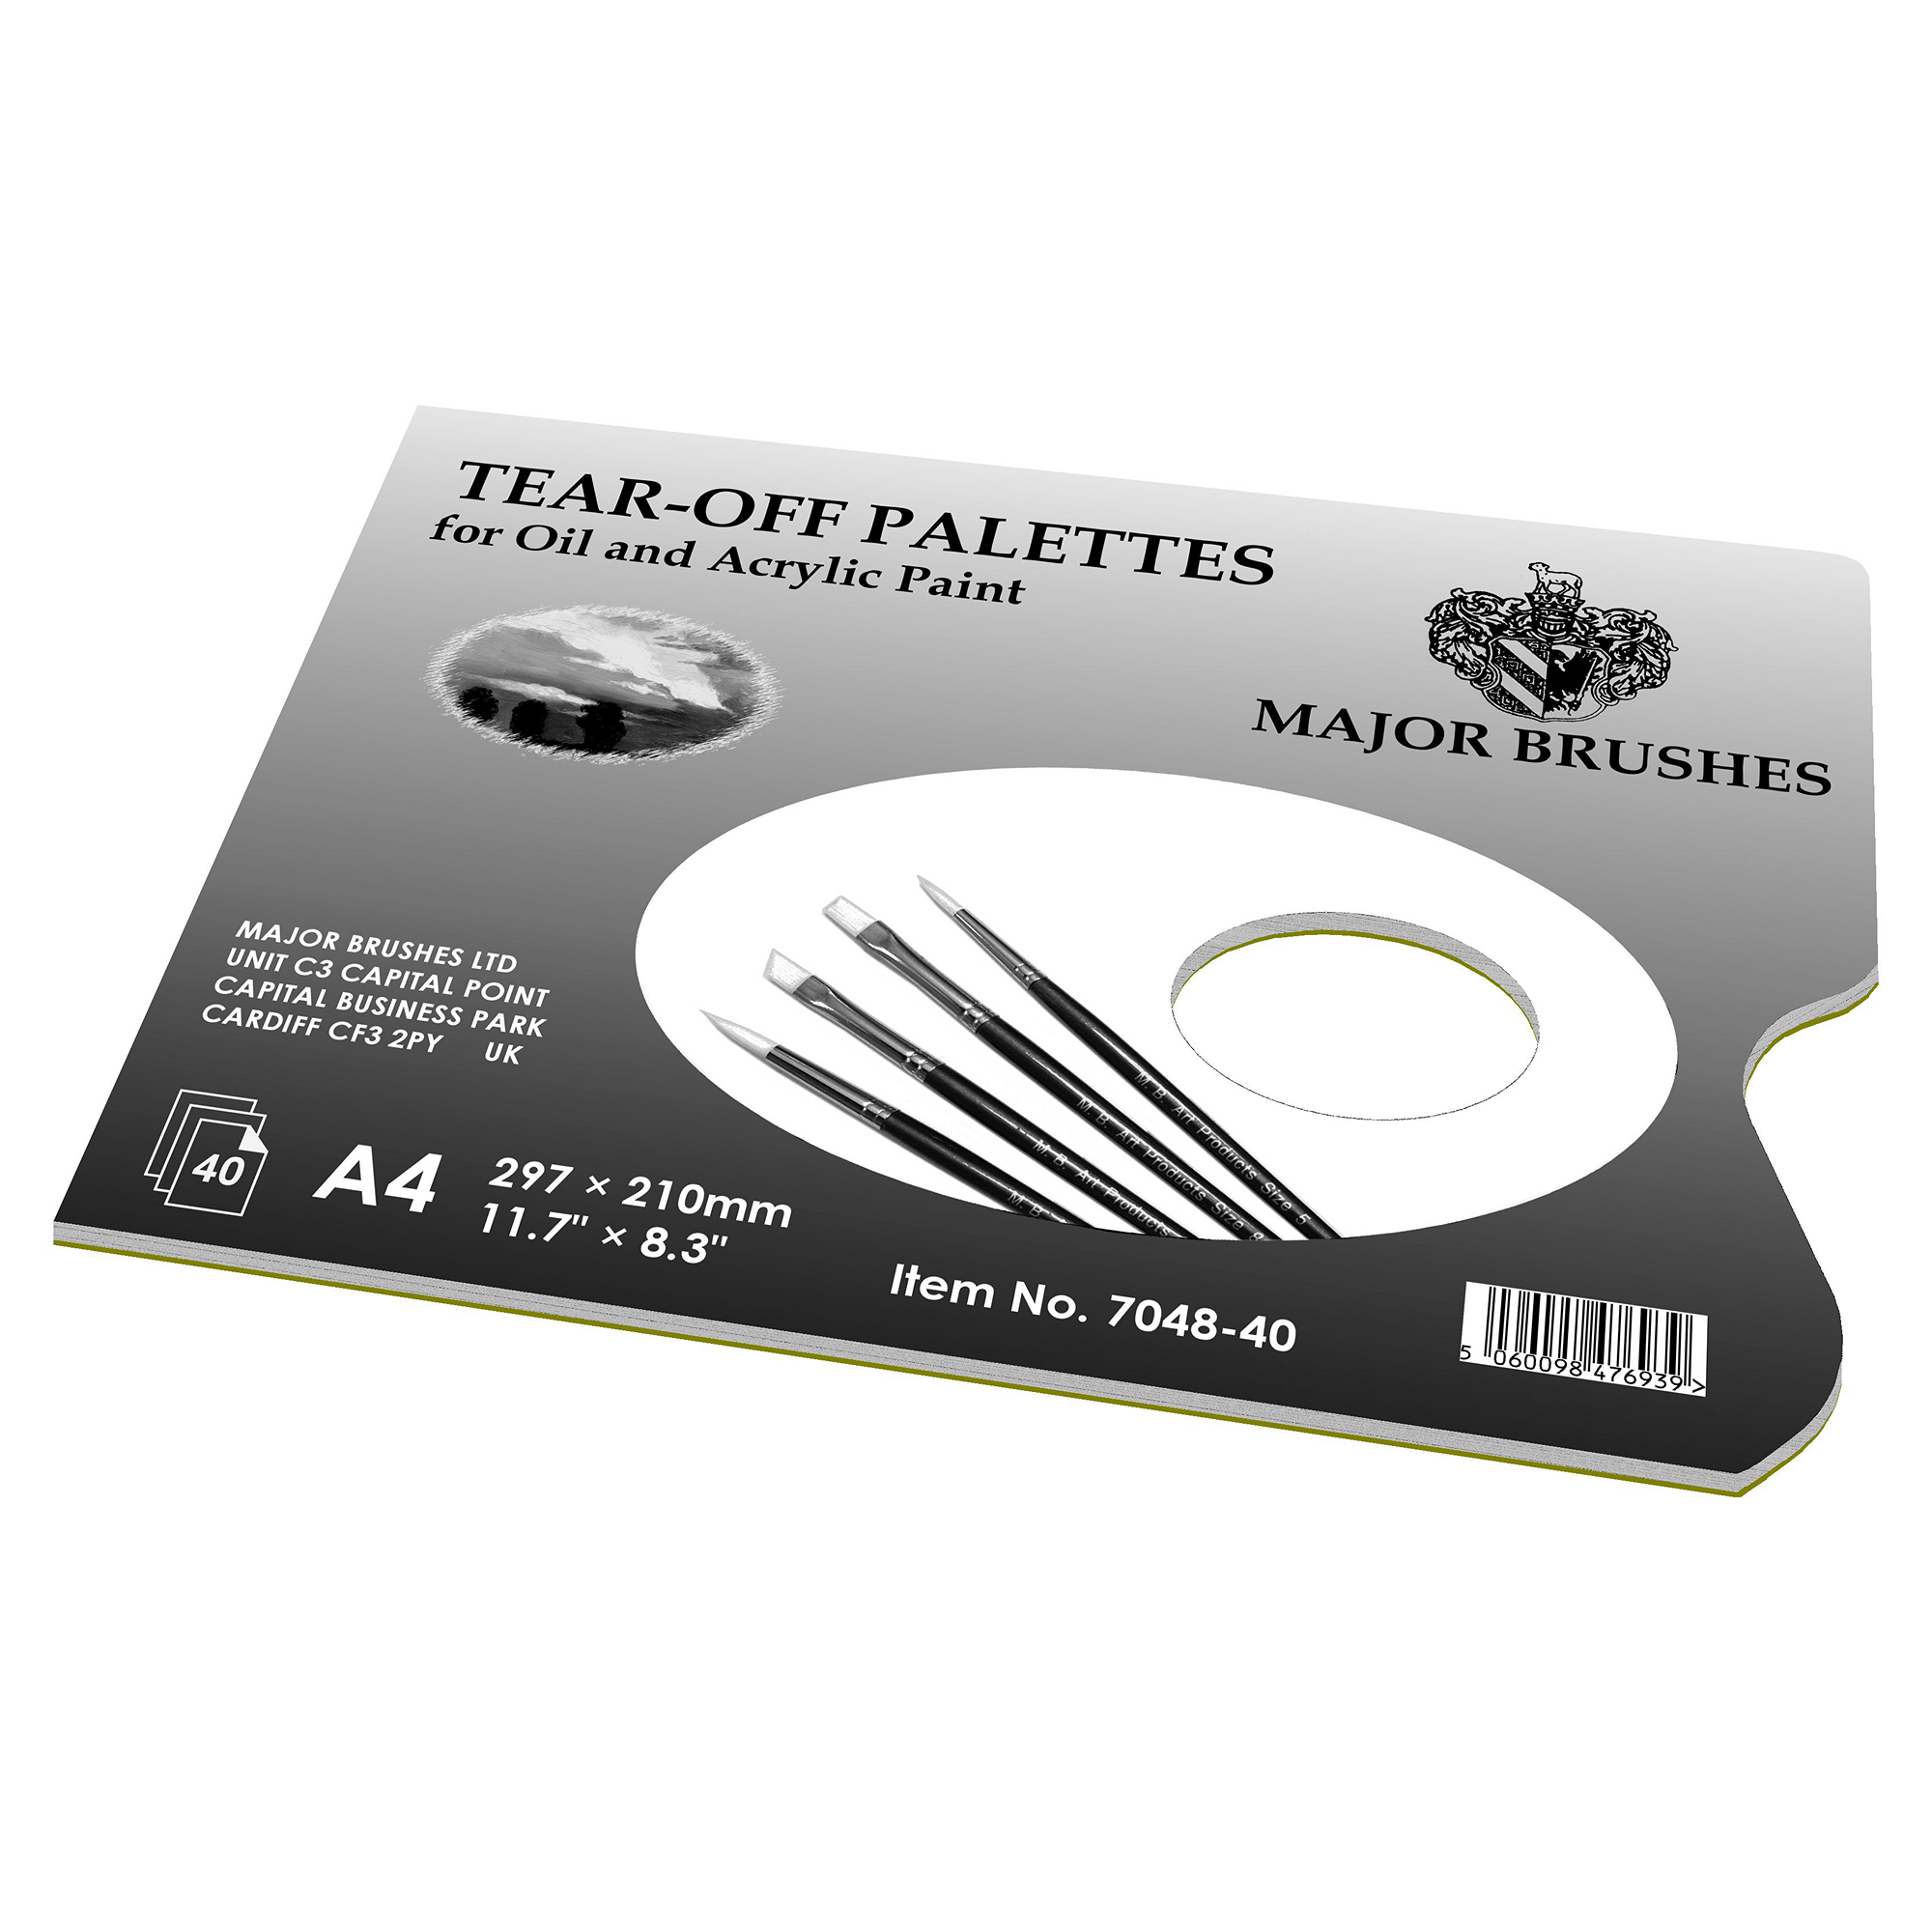 Tear-off Palettes A4 Pack 40